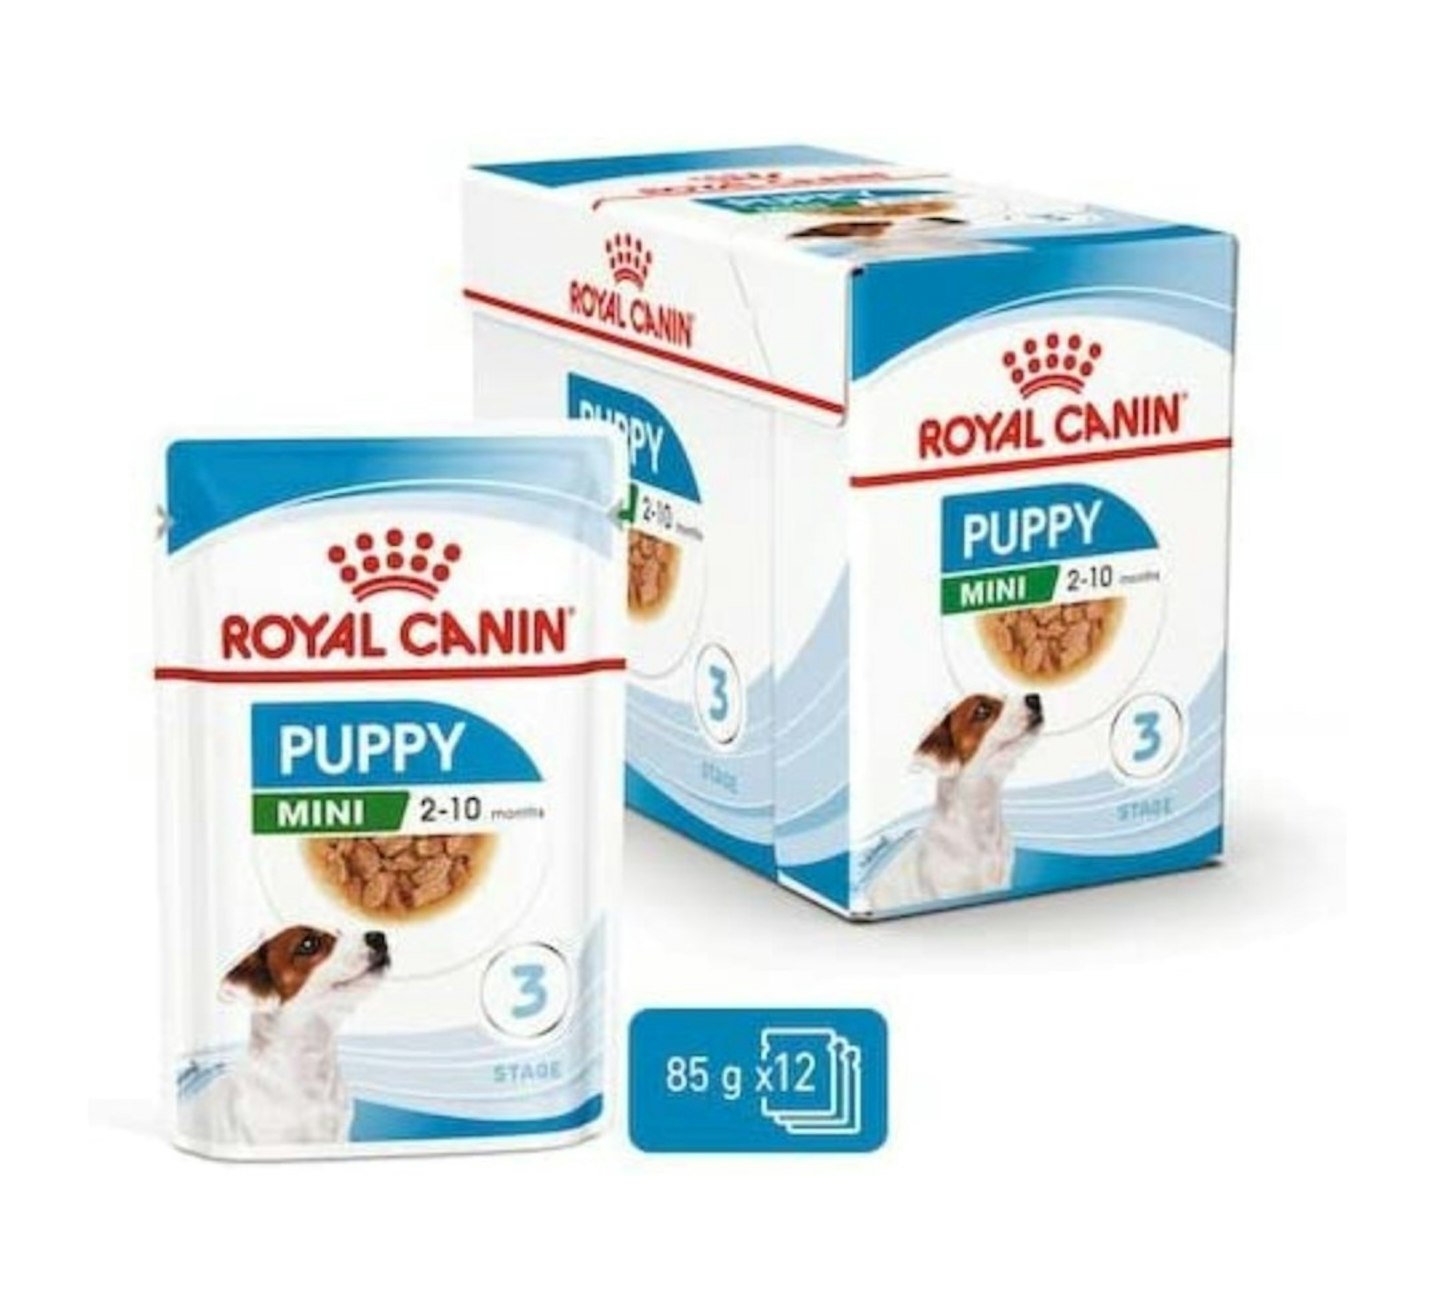  Royal Canin Mini Puppy / Junior Wet Dog Food 24 Pack 85g Each For Young And Growing Small Breed Dogs Up To 10 Months Old